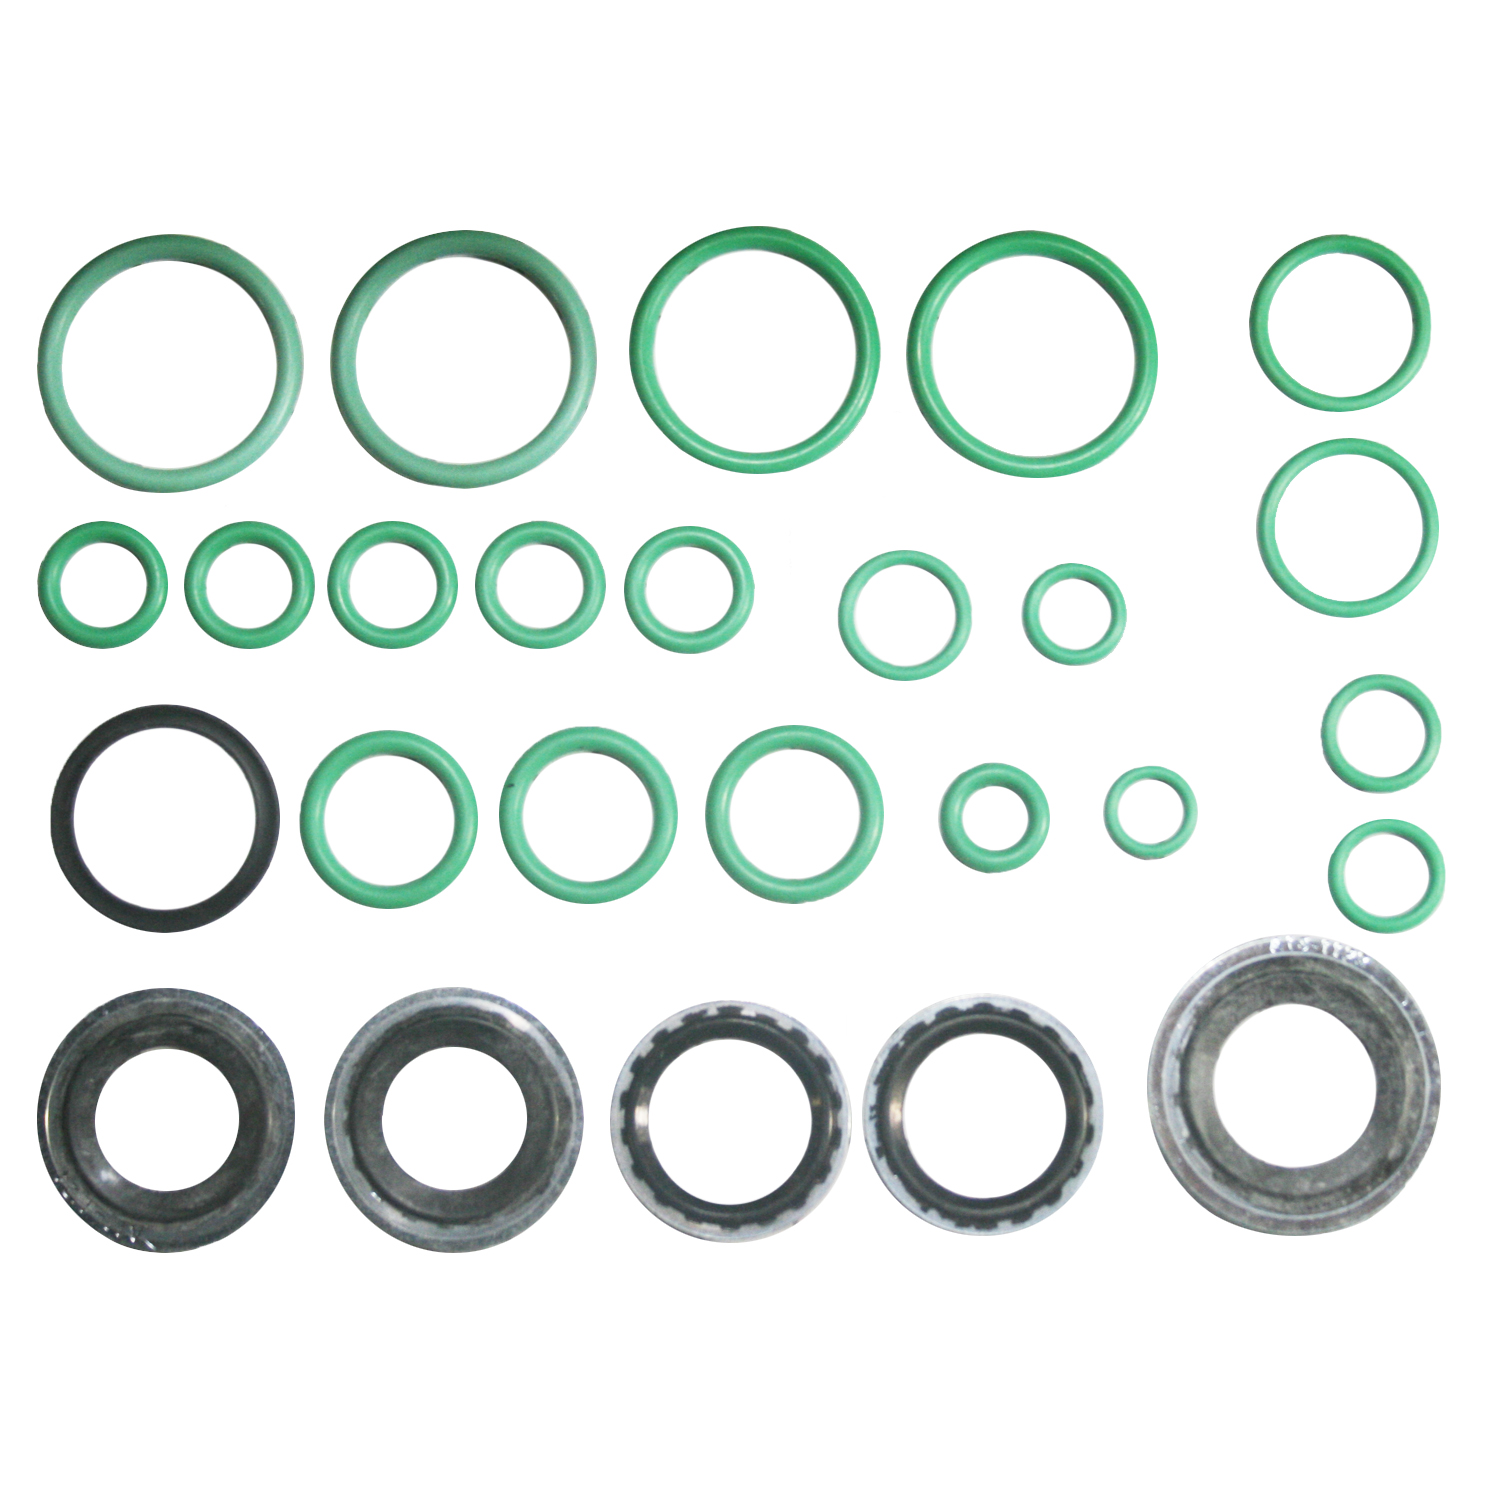 TCW O-Rings MT2541 New Product Image field_60b6a13a6e67c